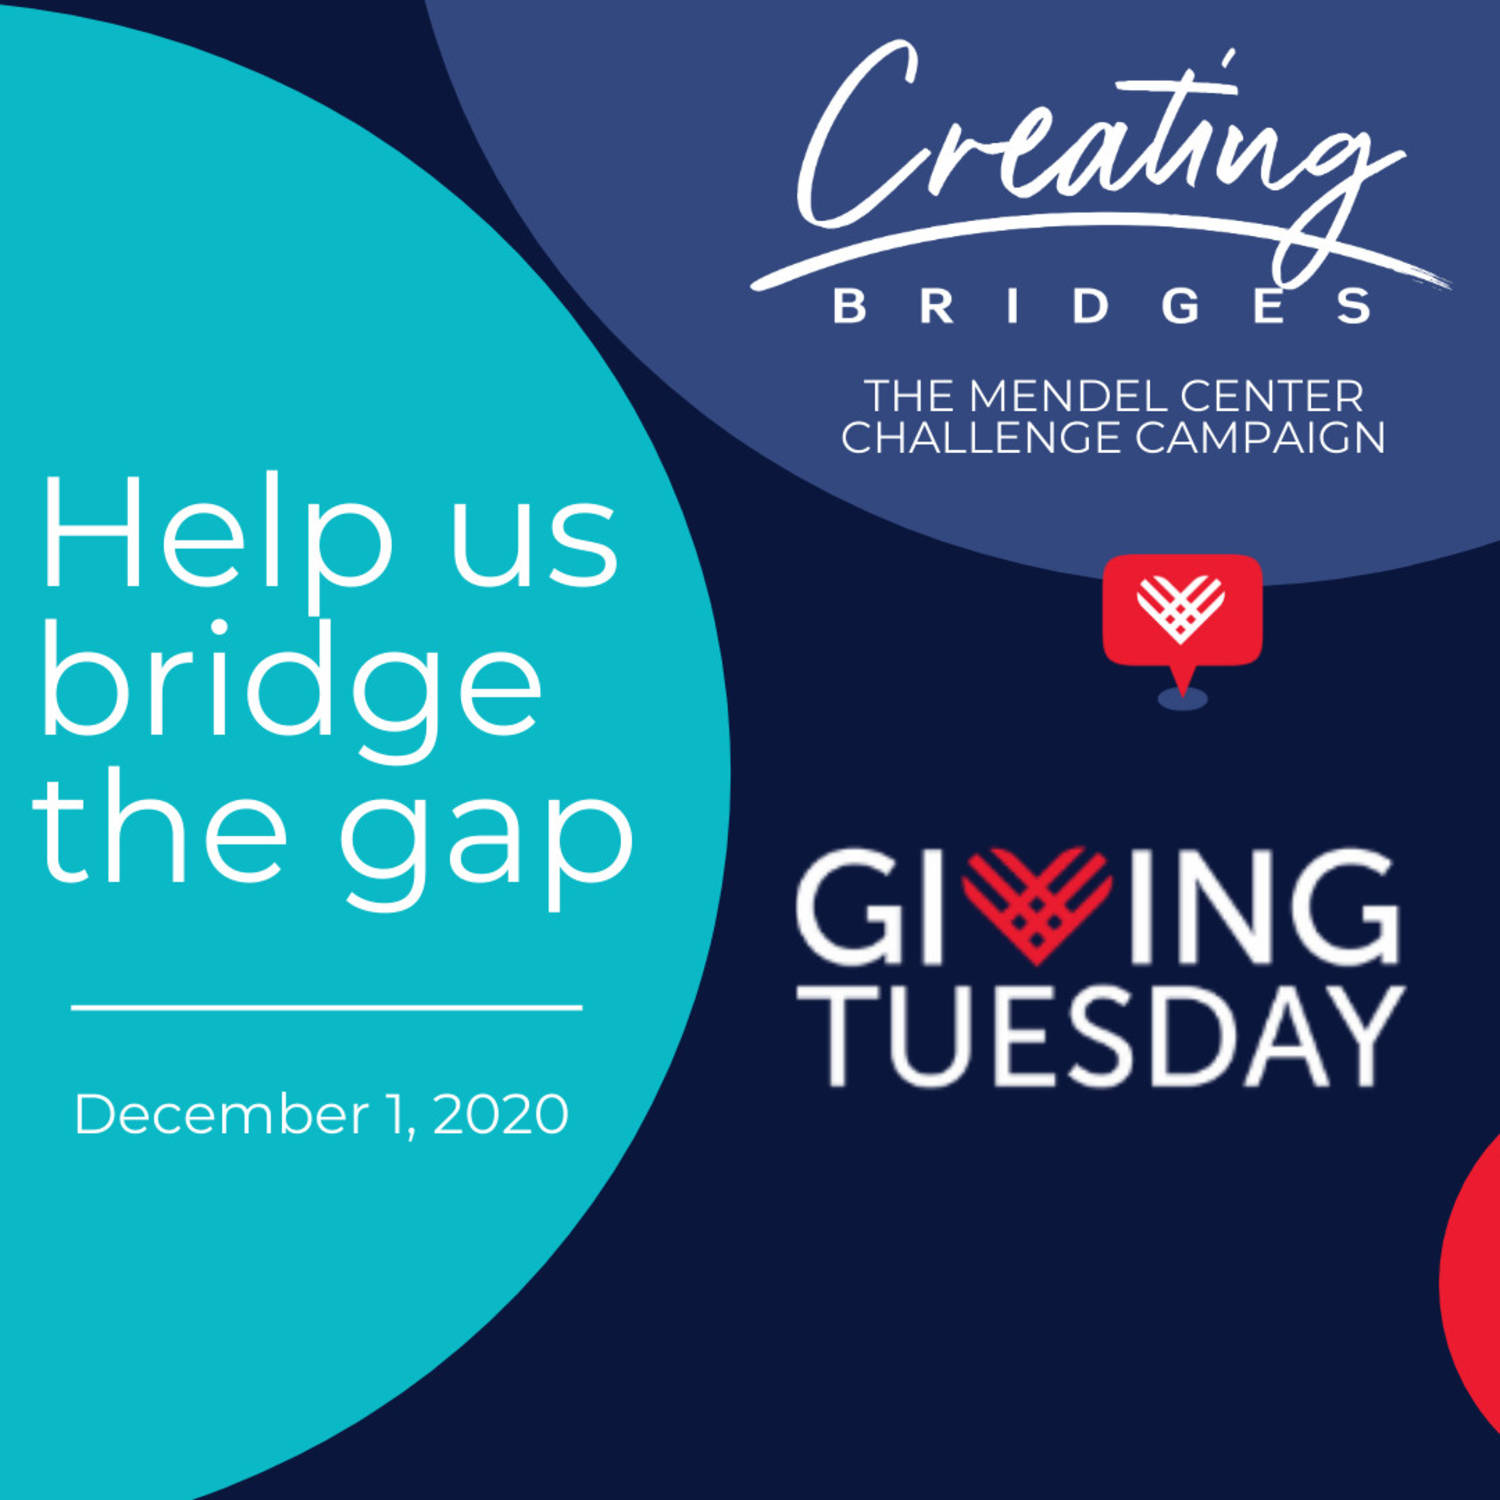 Your gift to The Mendel Center doubled on Giving Tuesday